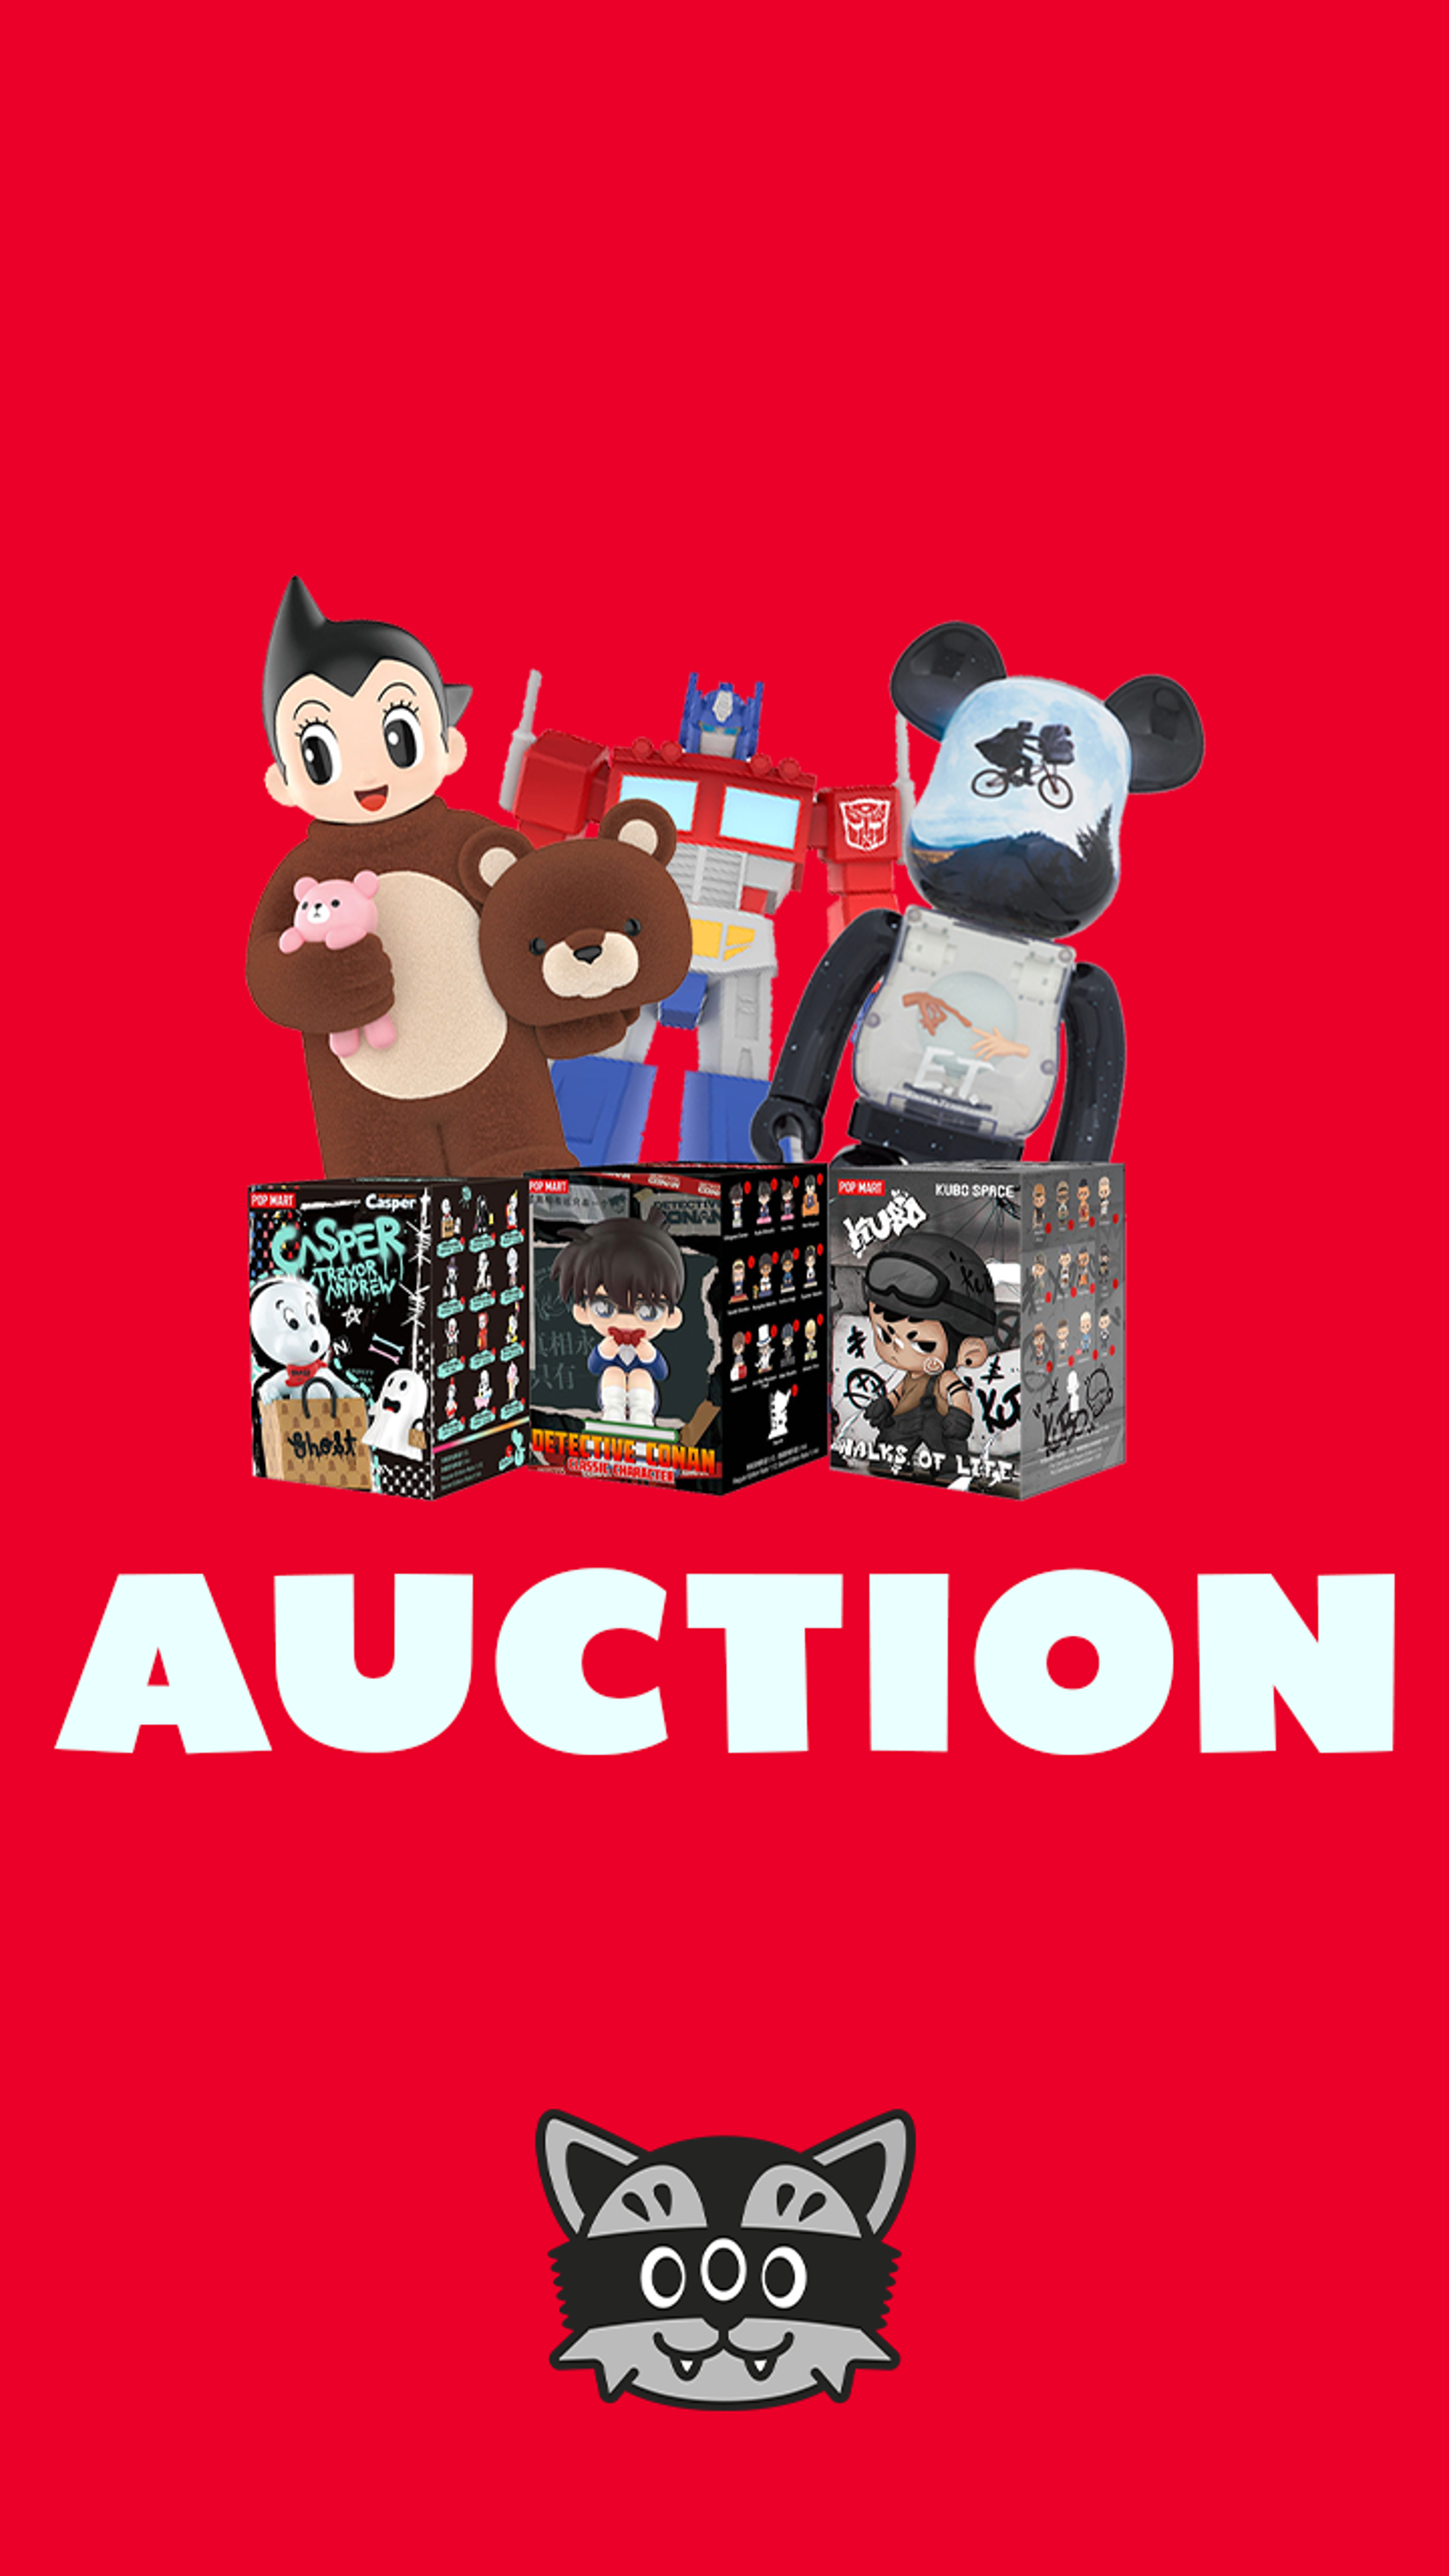 Preview image for the show titled "Mindzai Auction - February 29" at Today @ 6:00 PM